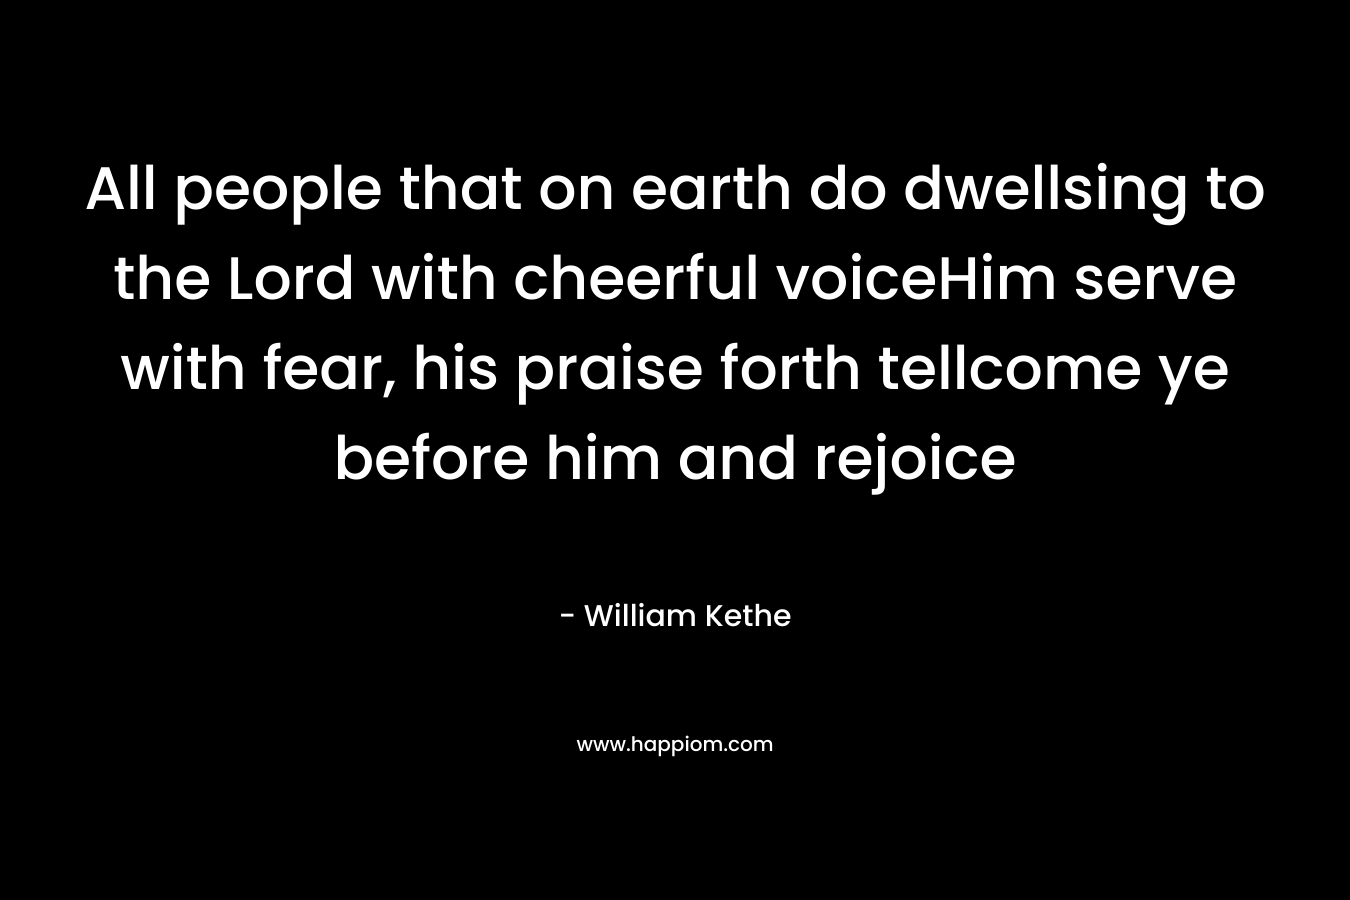 All people that on earth do dwellsing to the Lord with cheerful voiceHim serve with fear, his praise forth tellcome ye before him and rejoice